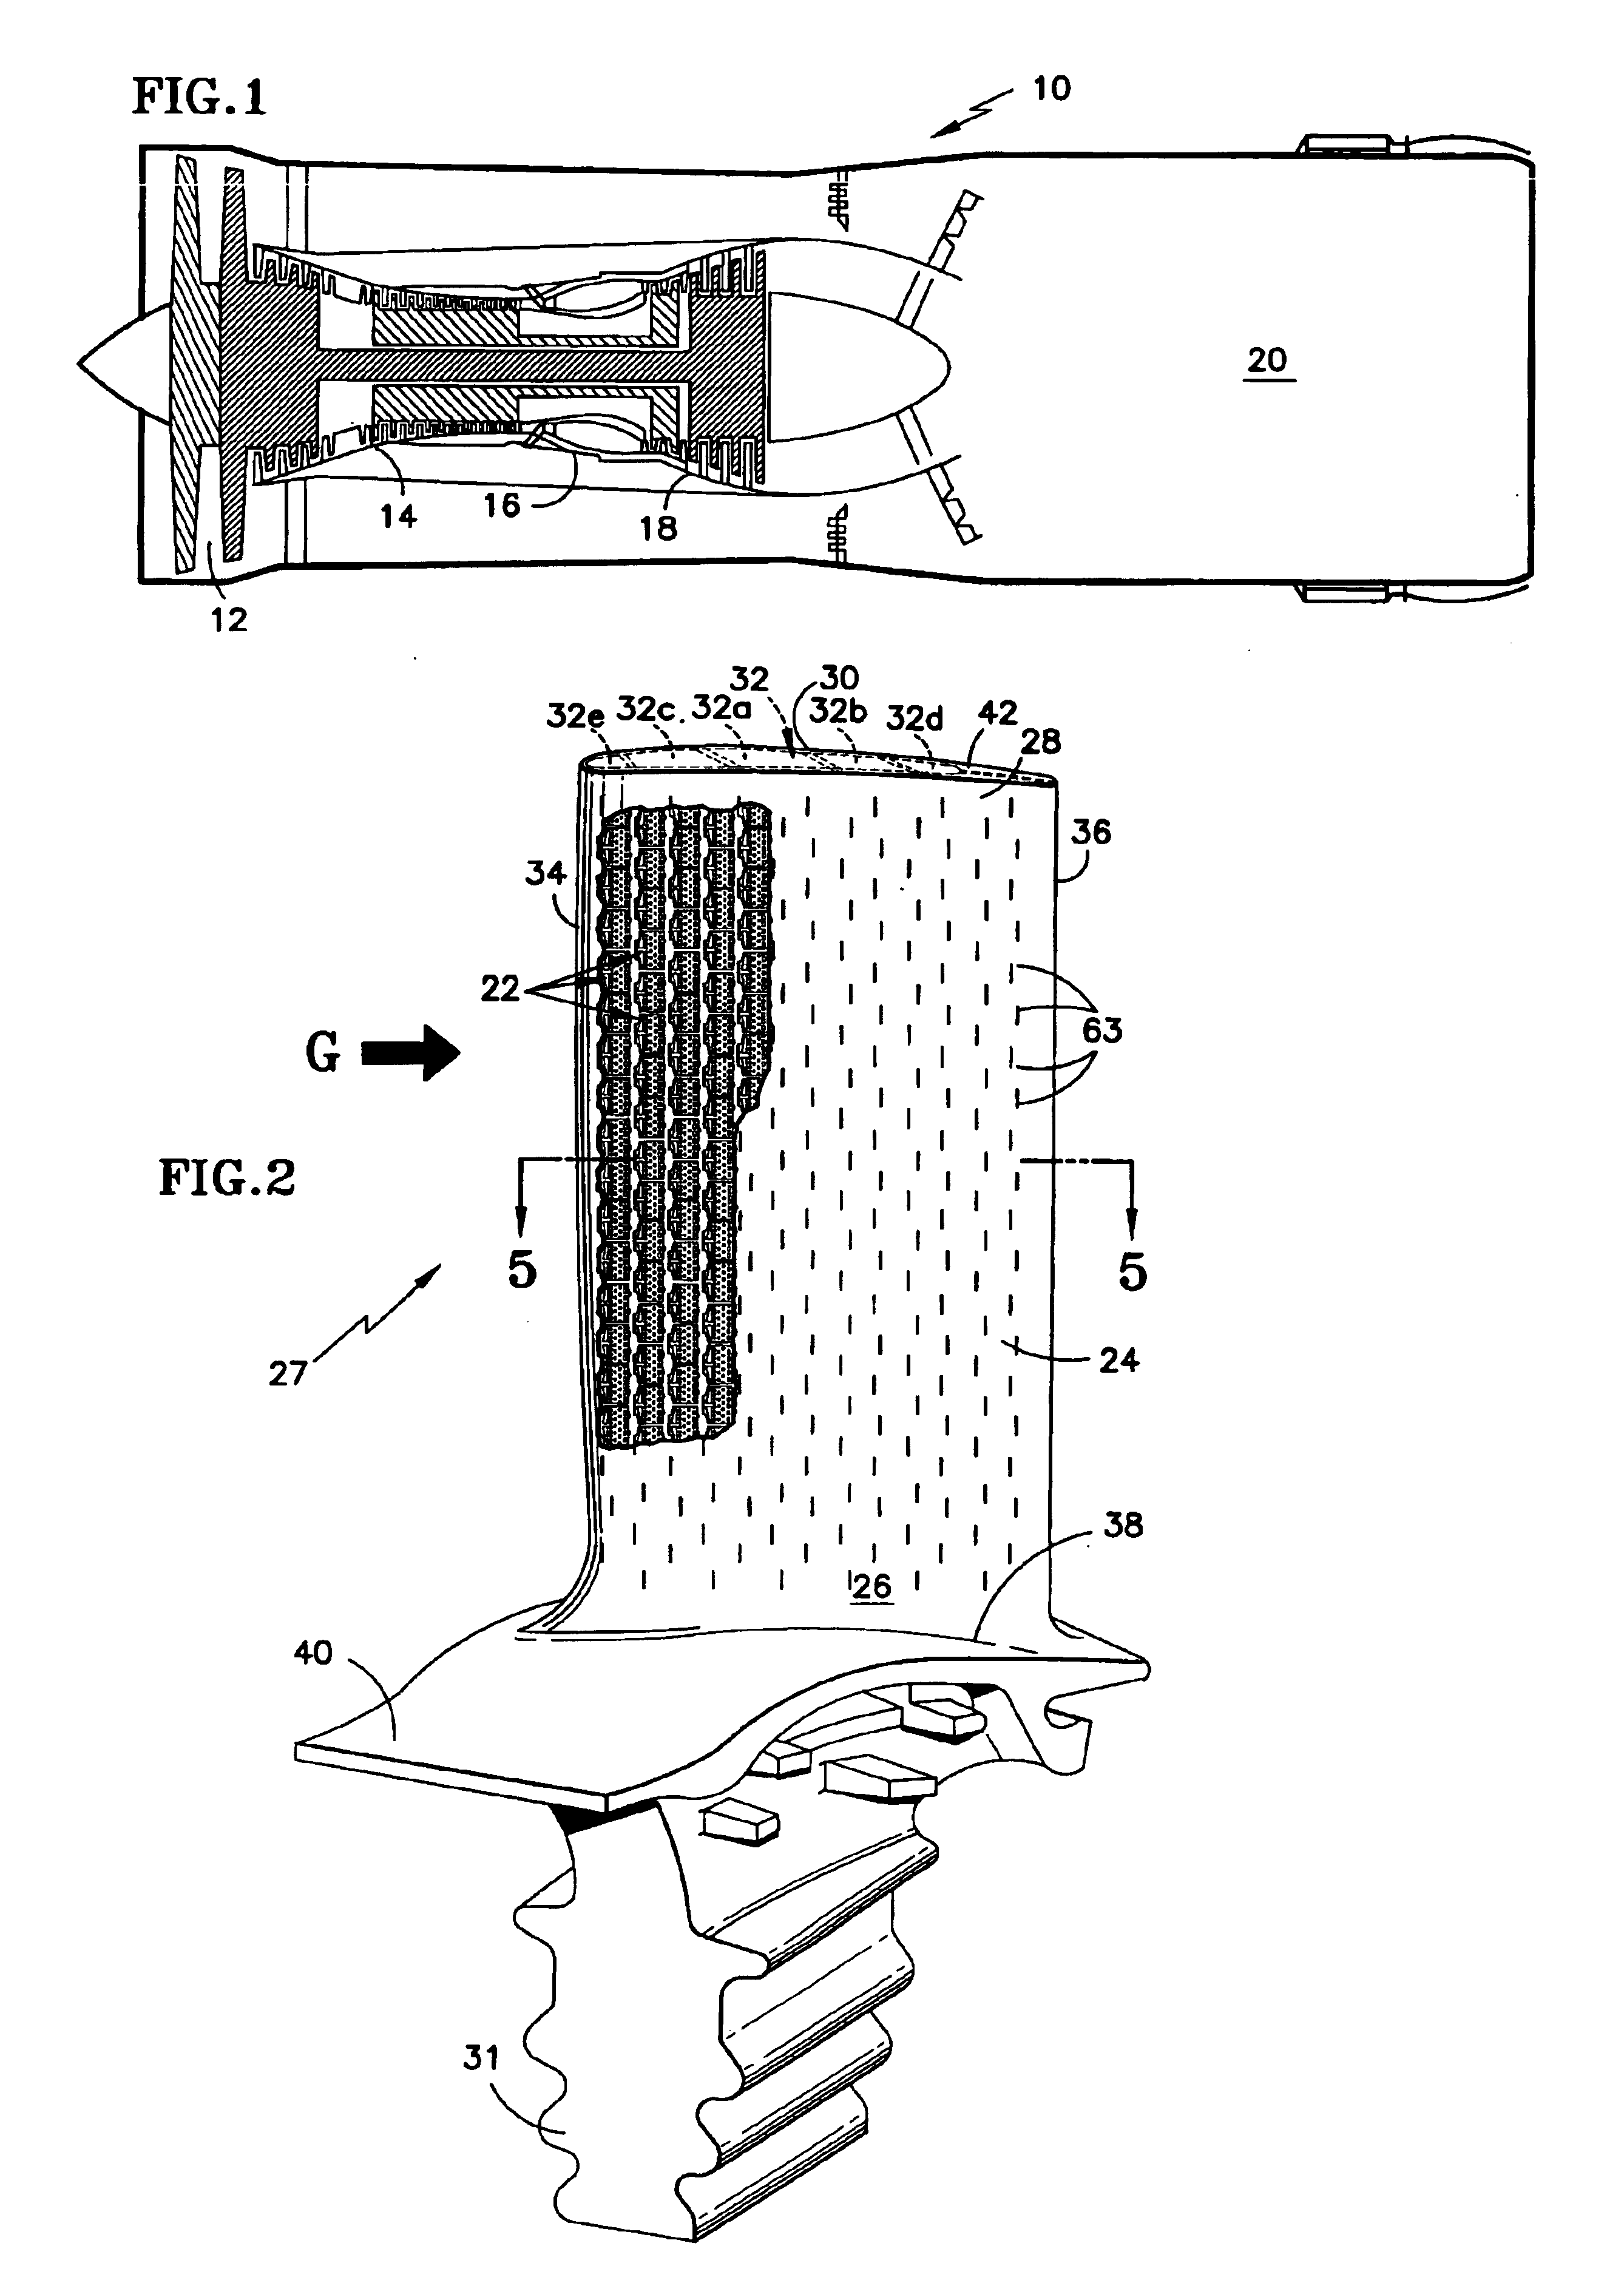 Microcircuit cooling for a turbine blade